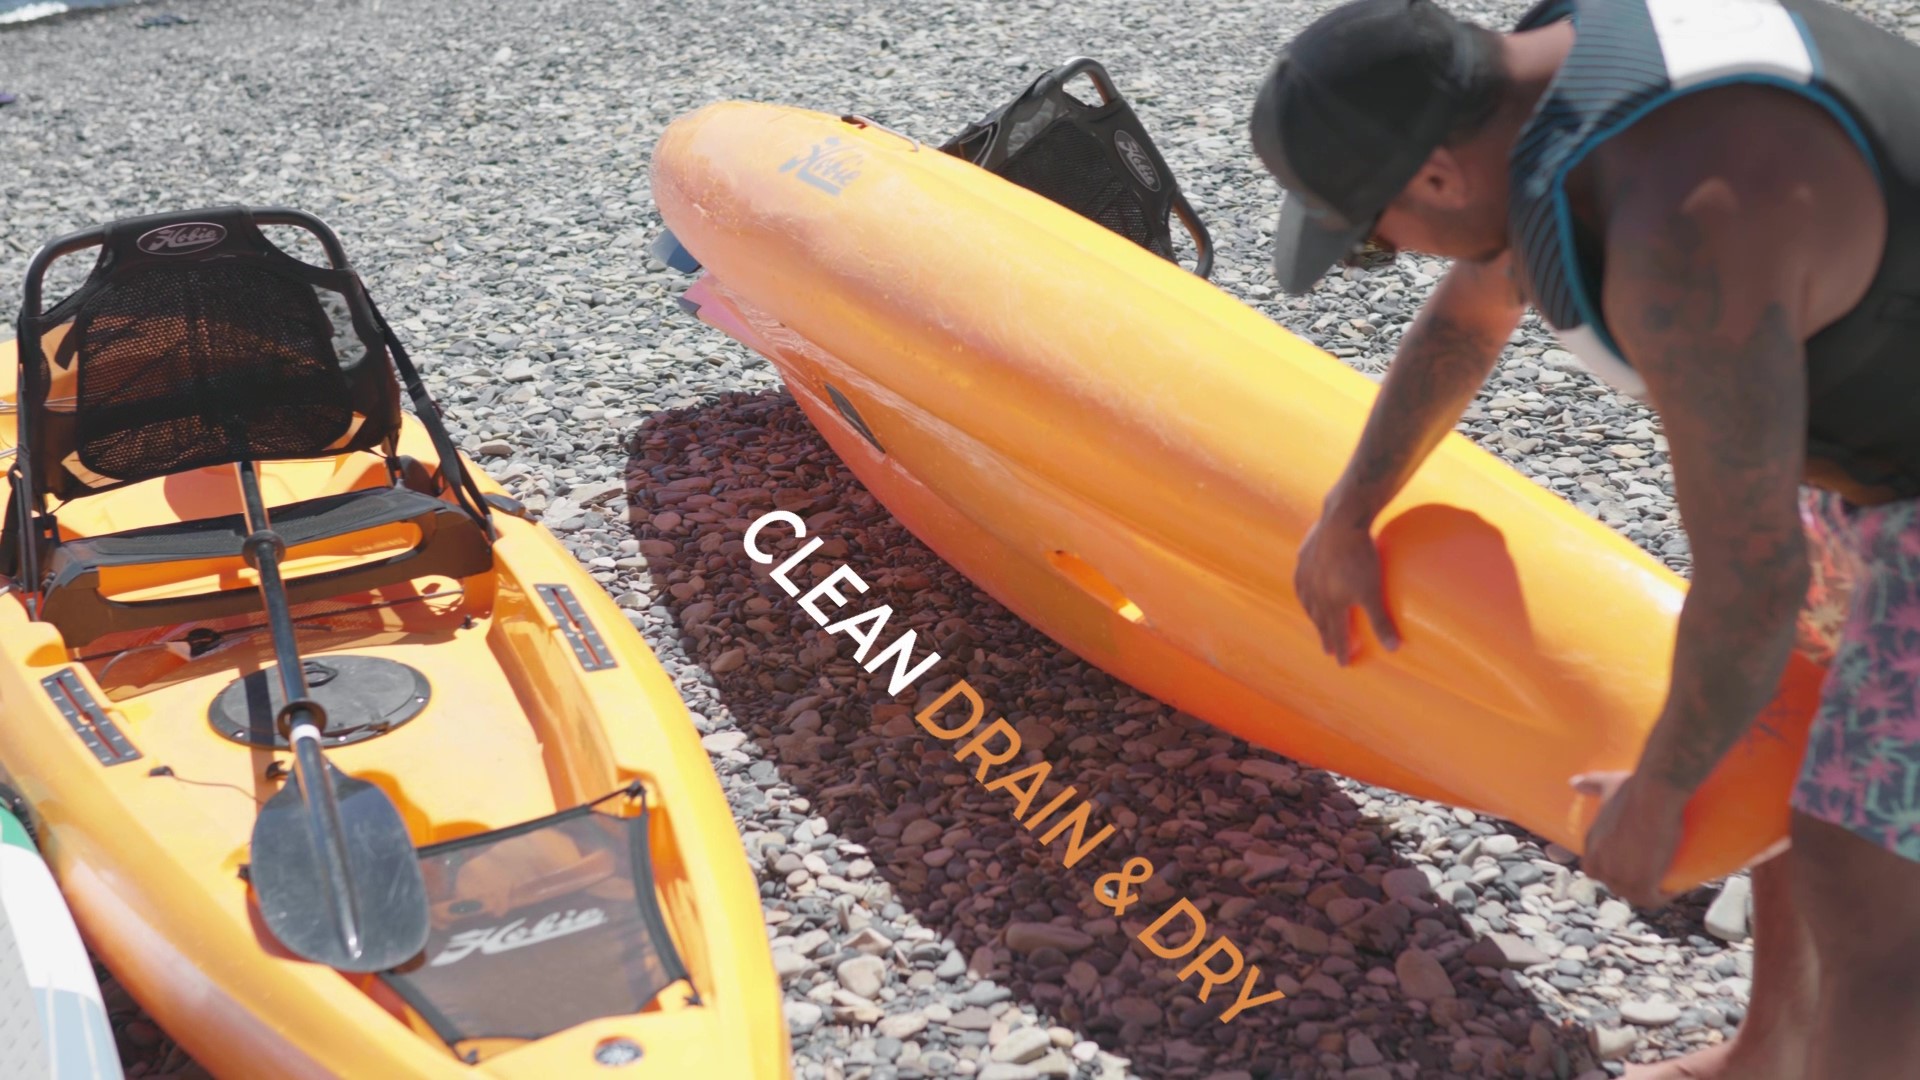 Clean drain and dry your kayak or sup